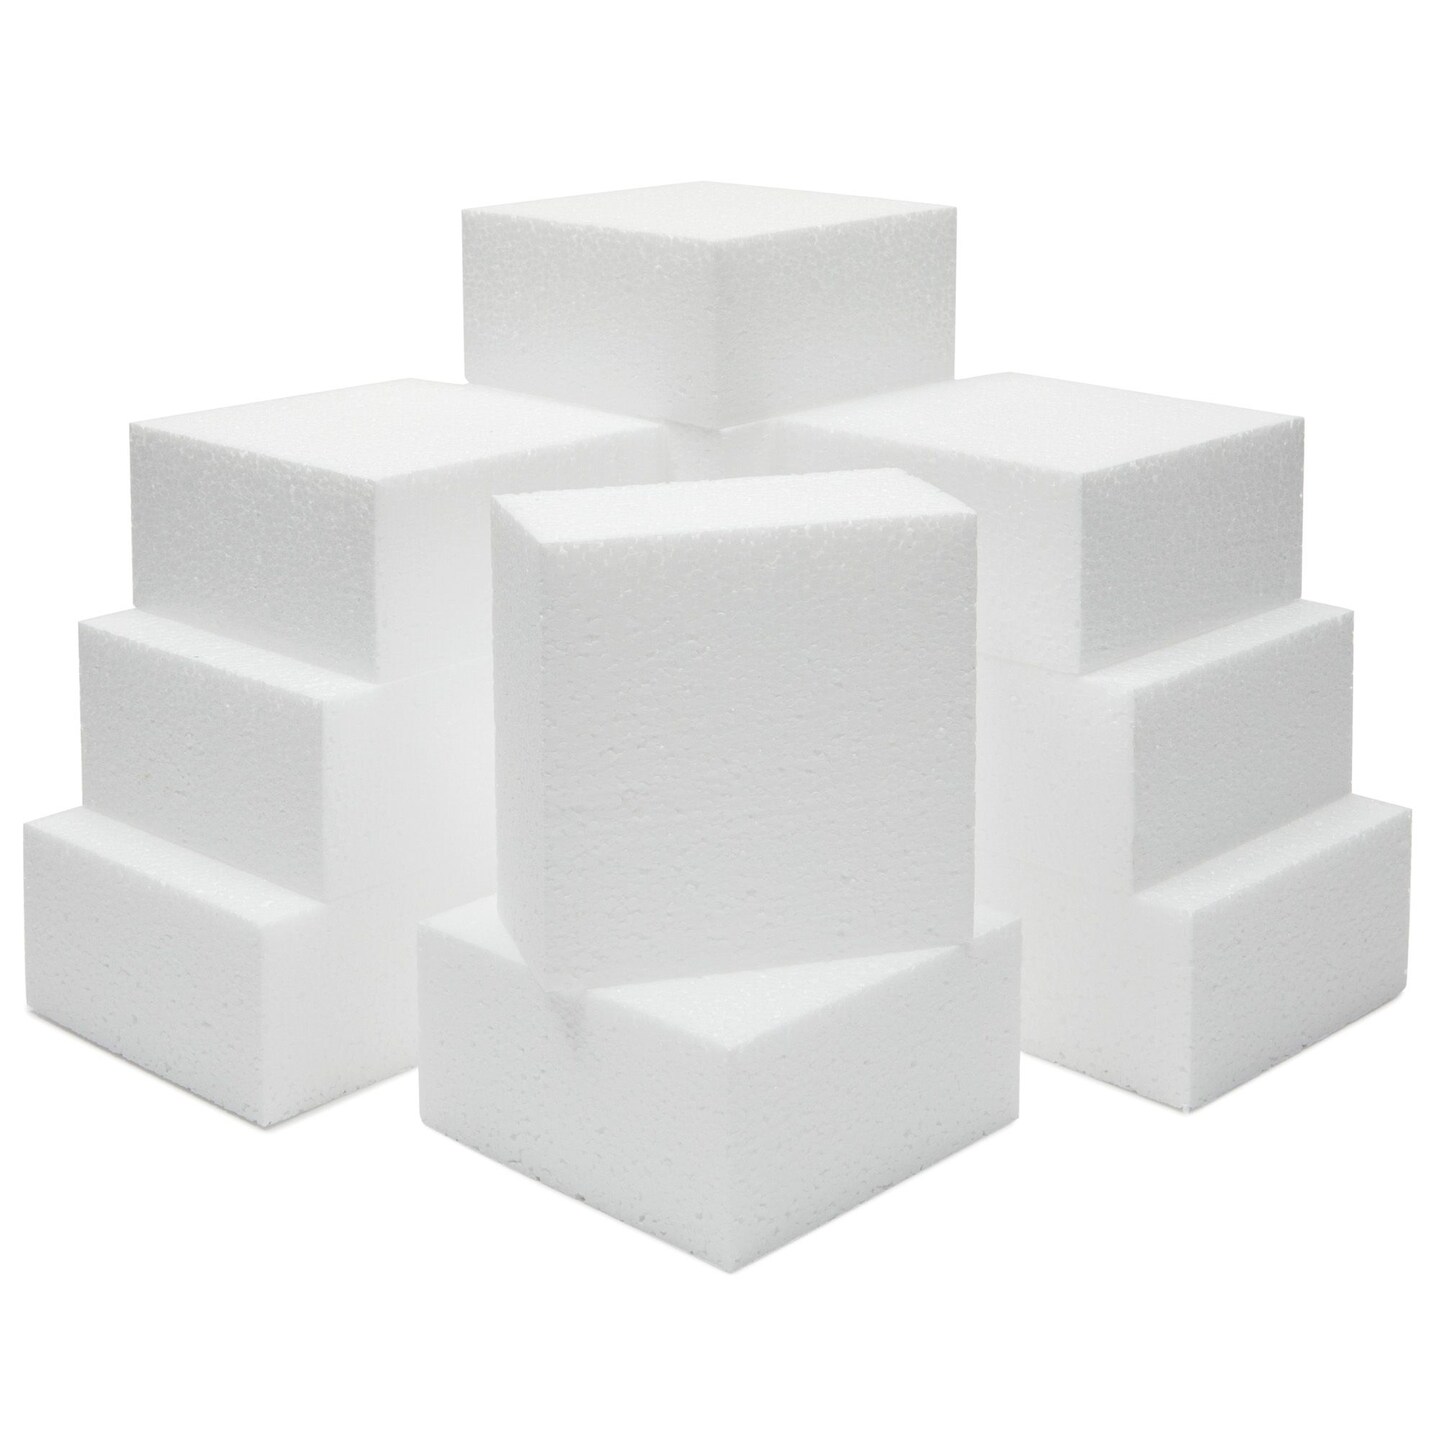 Trim Tool Square Floral Foam Blocks Dry Floral Foam For Artificial Flowers  Craft Project